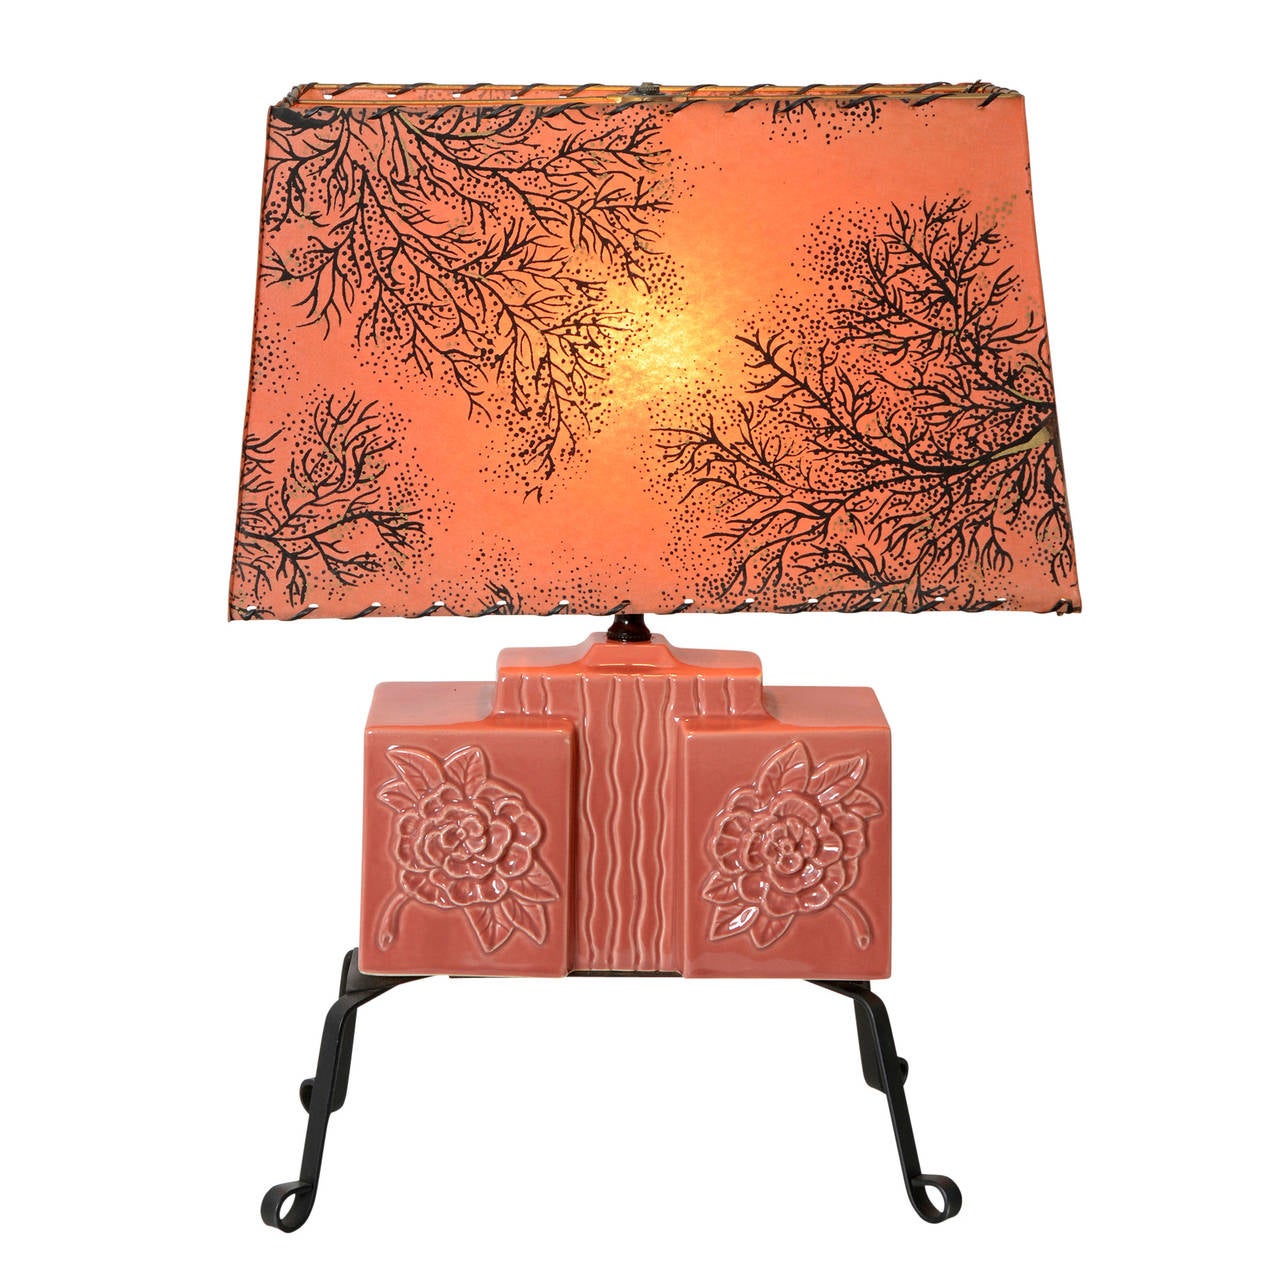 We are head-over-heels for this trio of rose-colored table lamps. The bodies are made from cast ceramic, featuring modern floral and organic patterns. The bases are wrought iron strapping, which, despite the material, give the lamps an airy,